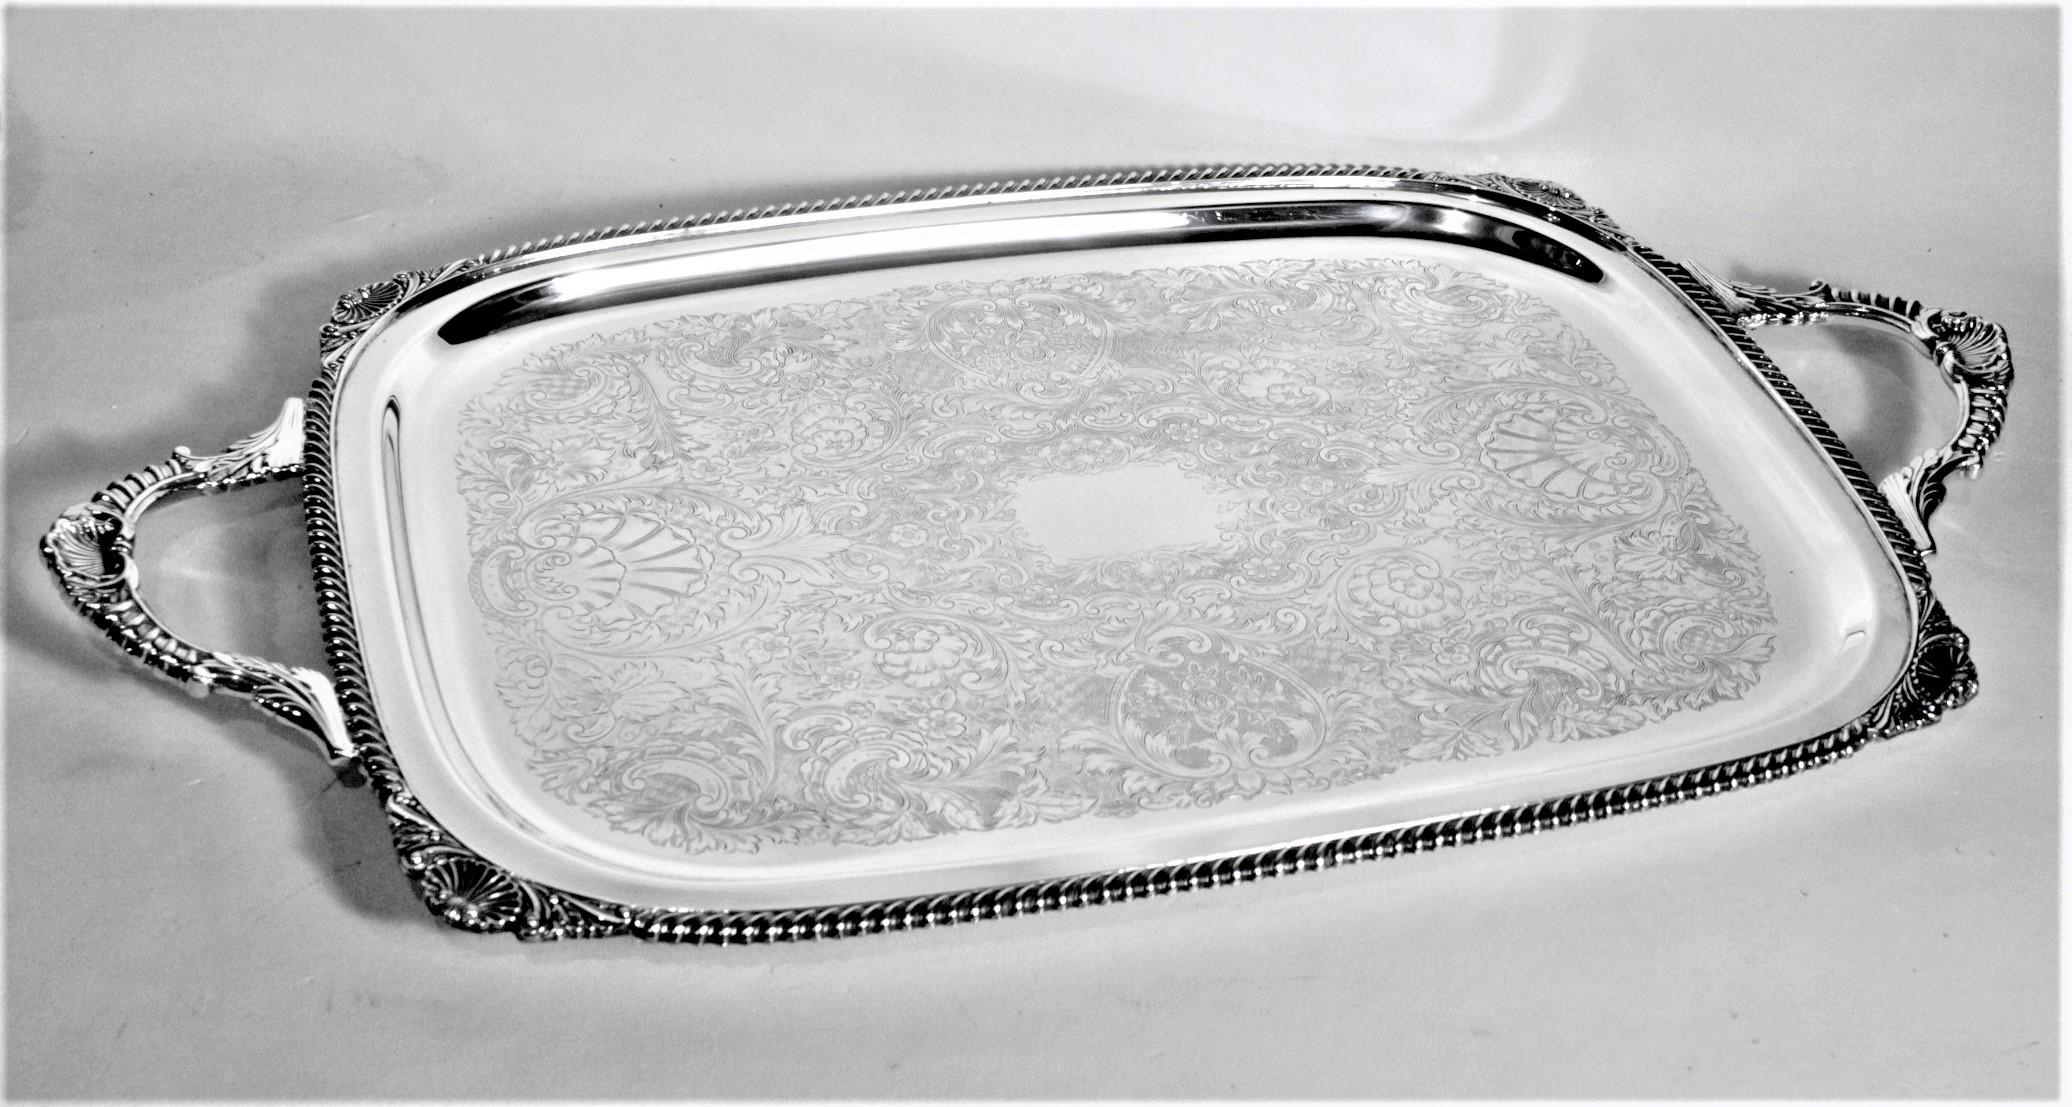 This antique styled silver plated serving tray was made for the well known Birks retailer, likely by an English maker in approximately 1920 in an Edwardian style. This rectangular shaped tray has a very nicely beaded outer surround with